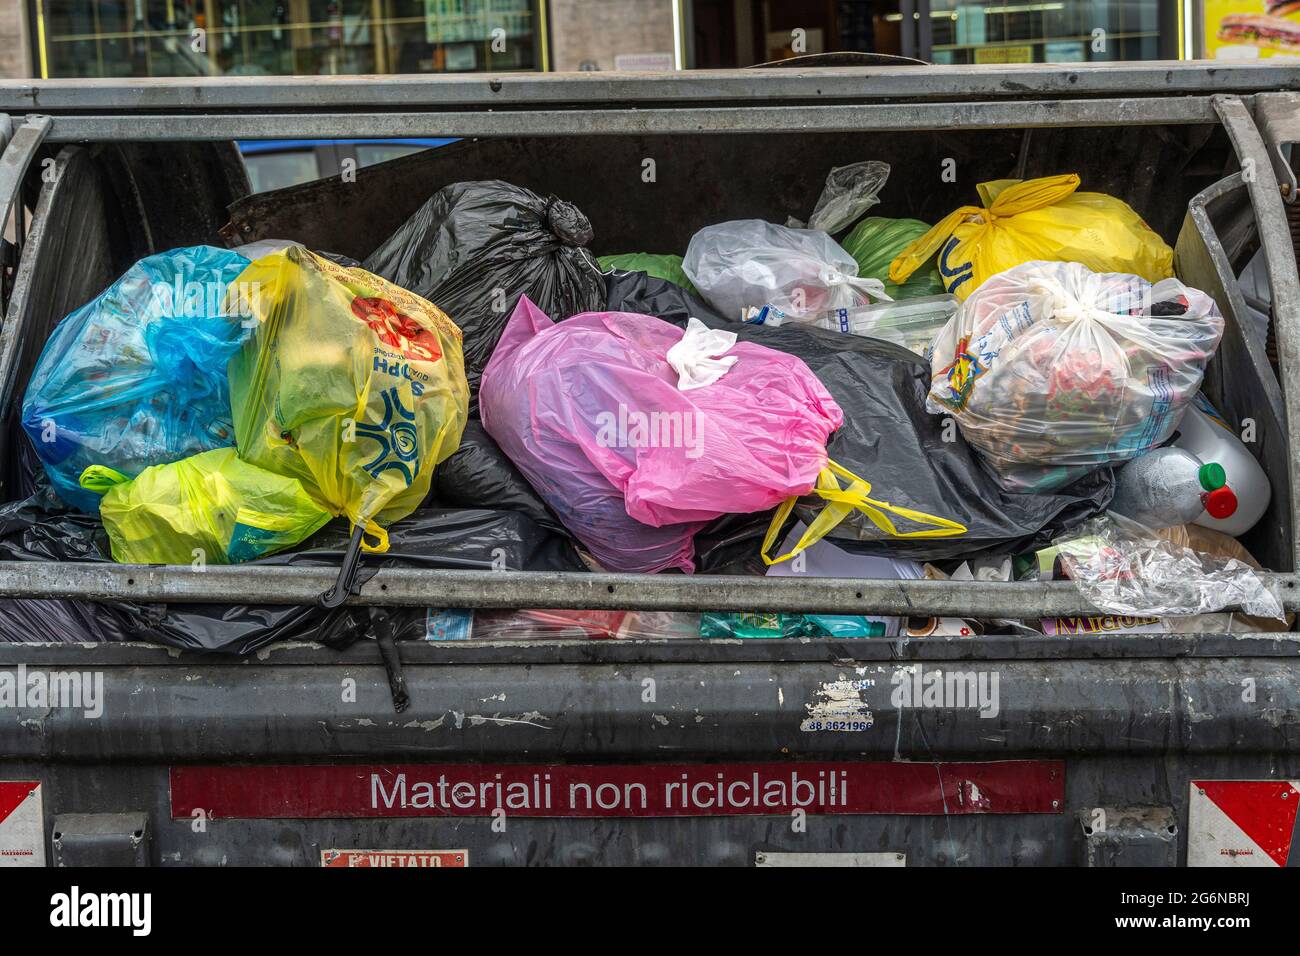 Non-recyclable garbage bin filled with garbage bags. Rome, Lazio, Italy, Europe Stock Photo